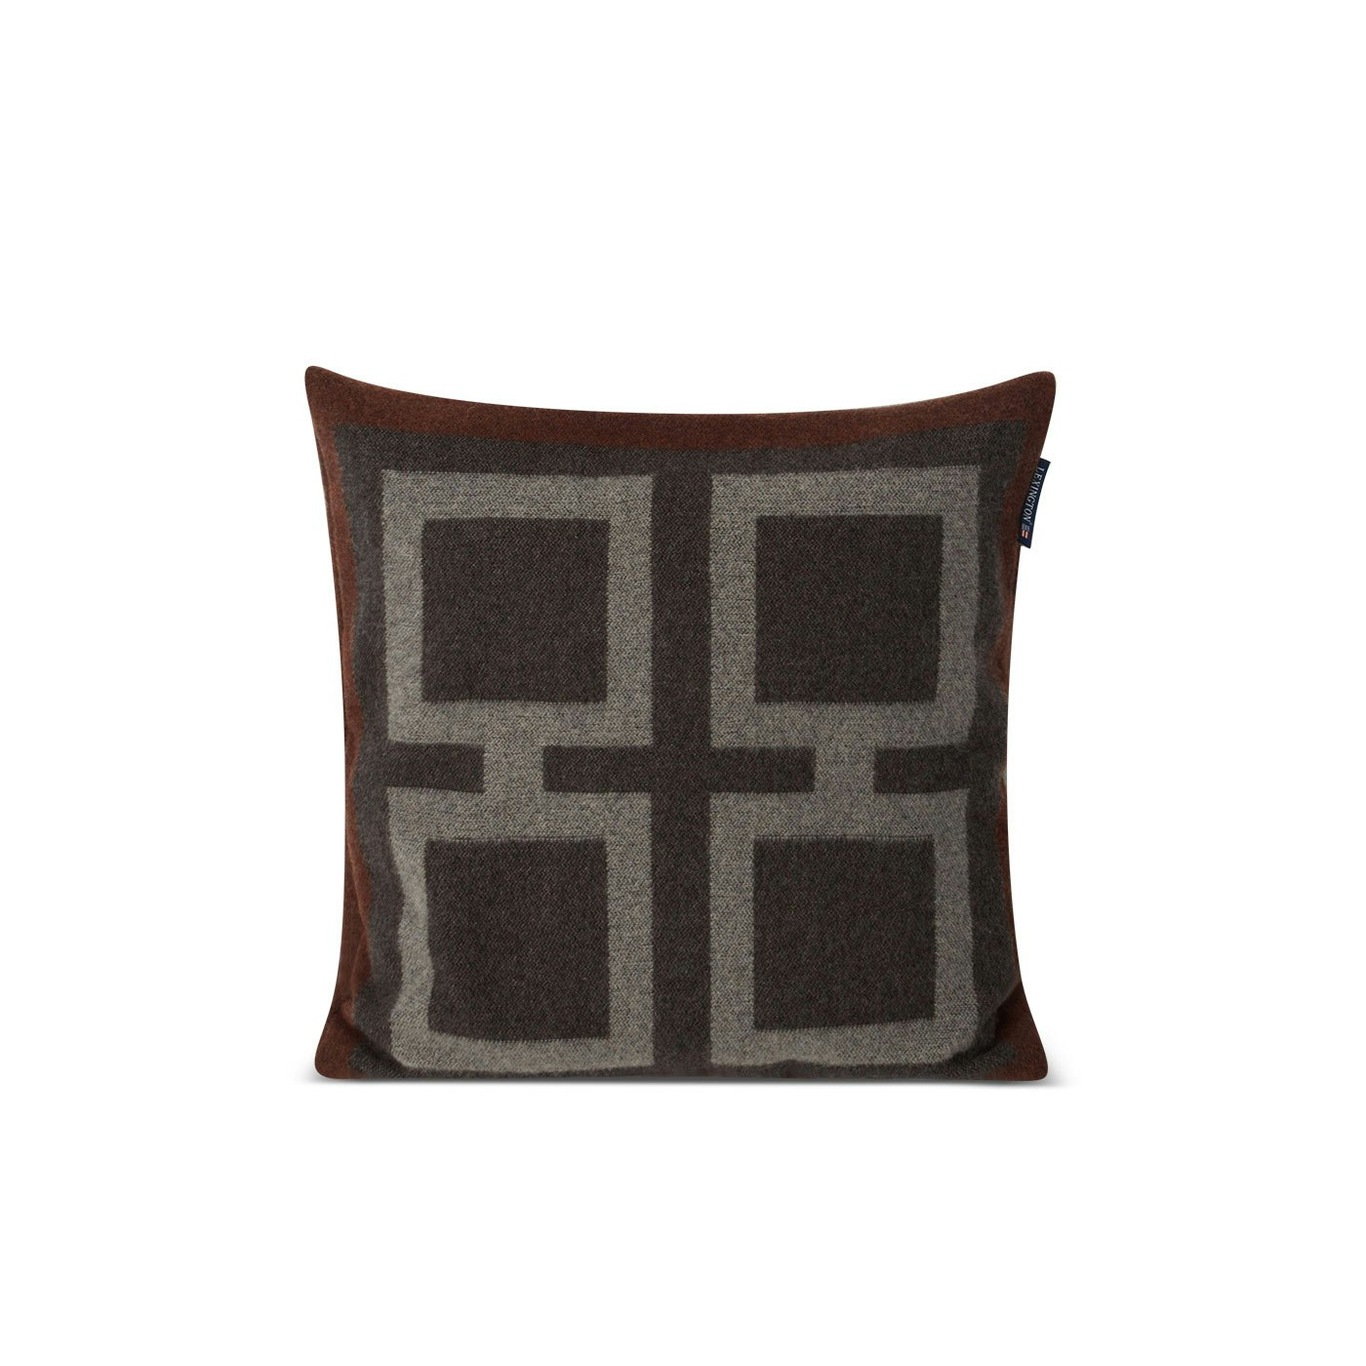 Graphic Recycled Wool Pillow Cover Kuddfodral 50x50 cm